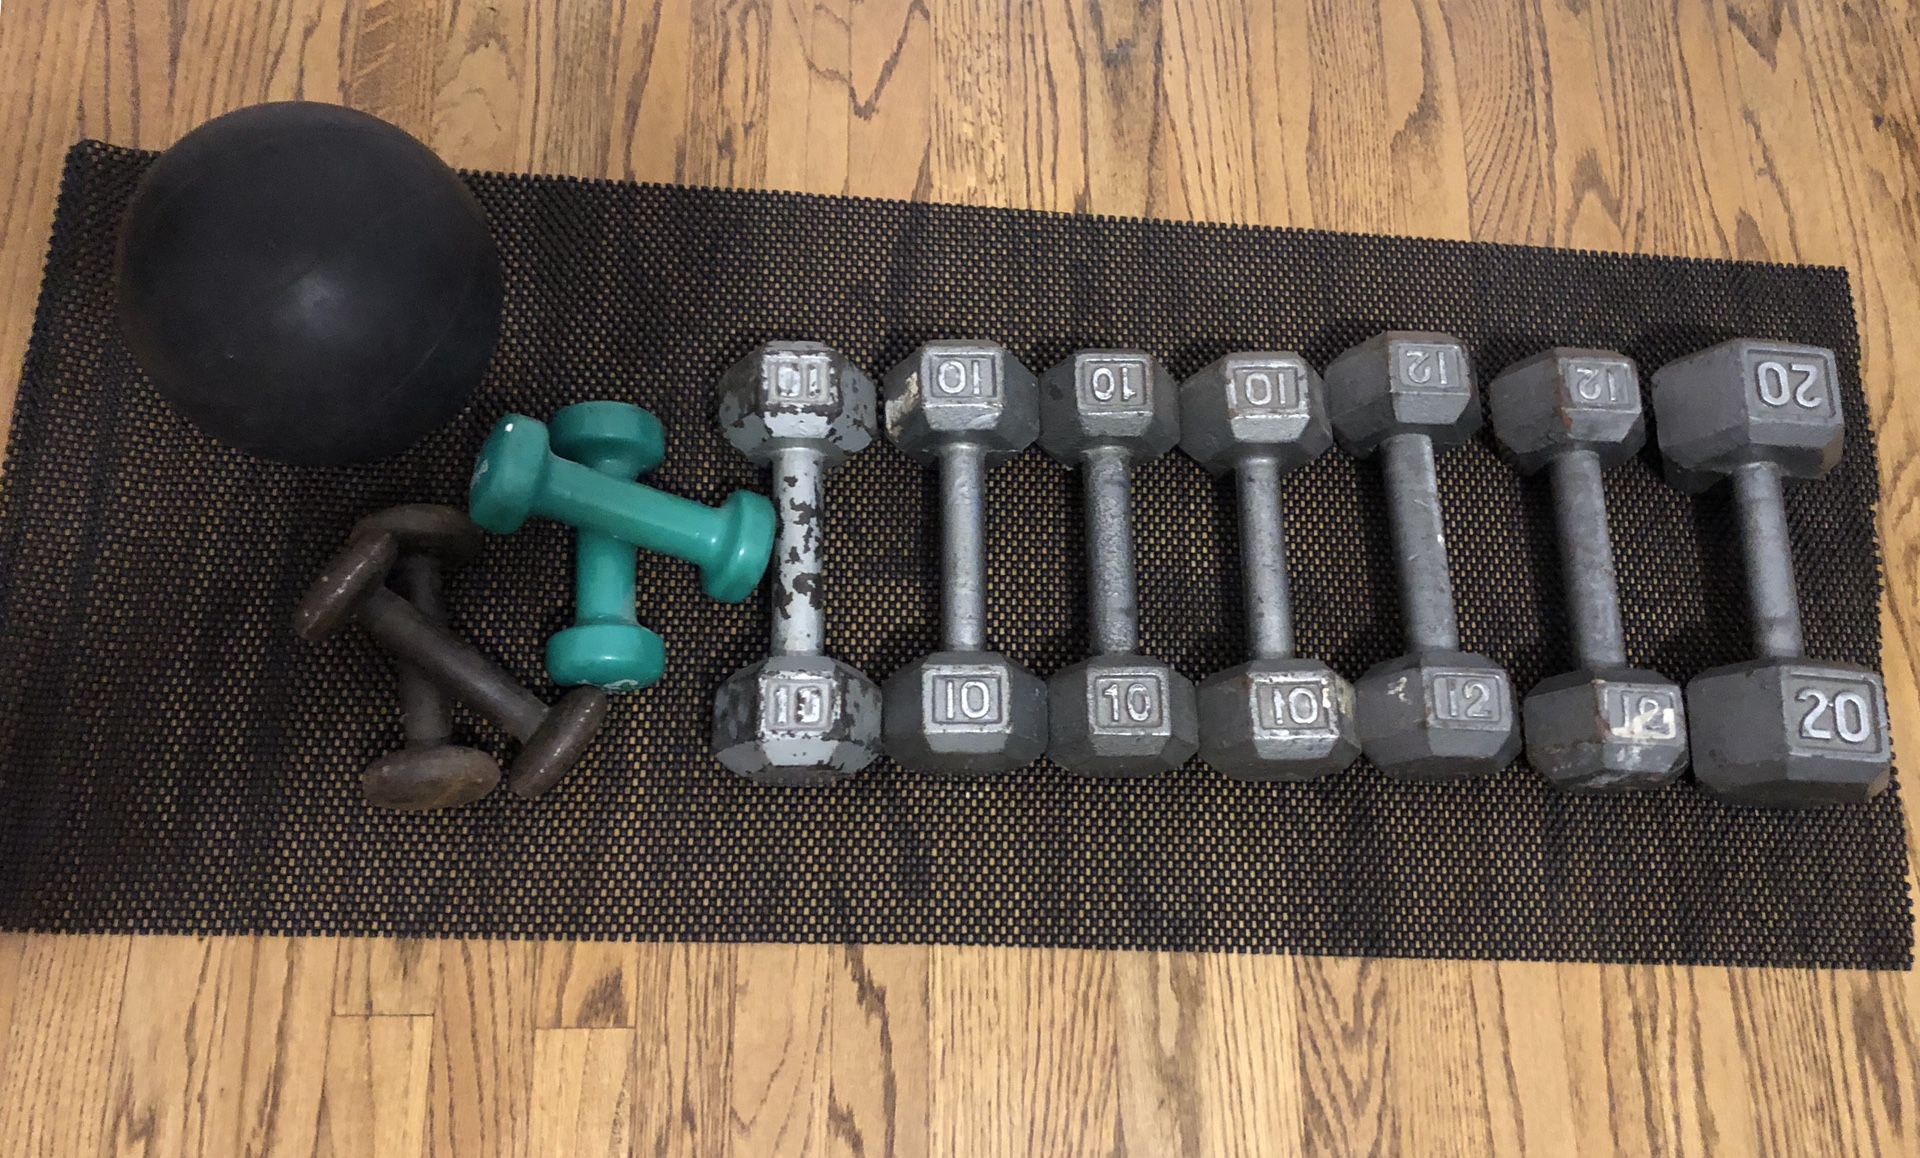 Dumbbells - 2 sets of 3lb weights, 2 sets of 10 lb weights, 1 set of 12 lb weights and a 20 lb weight. Additional clip to workout legs and wgt ball